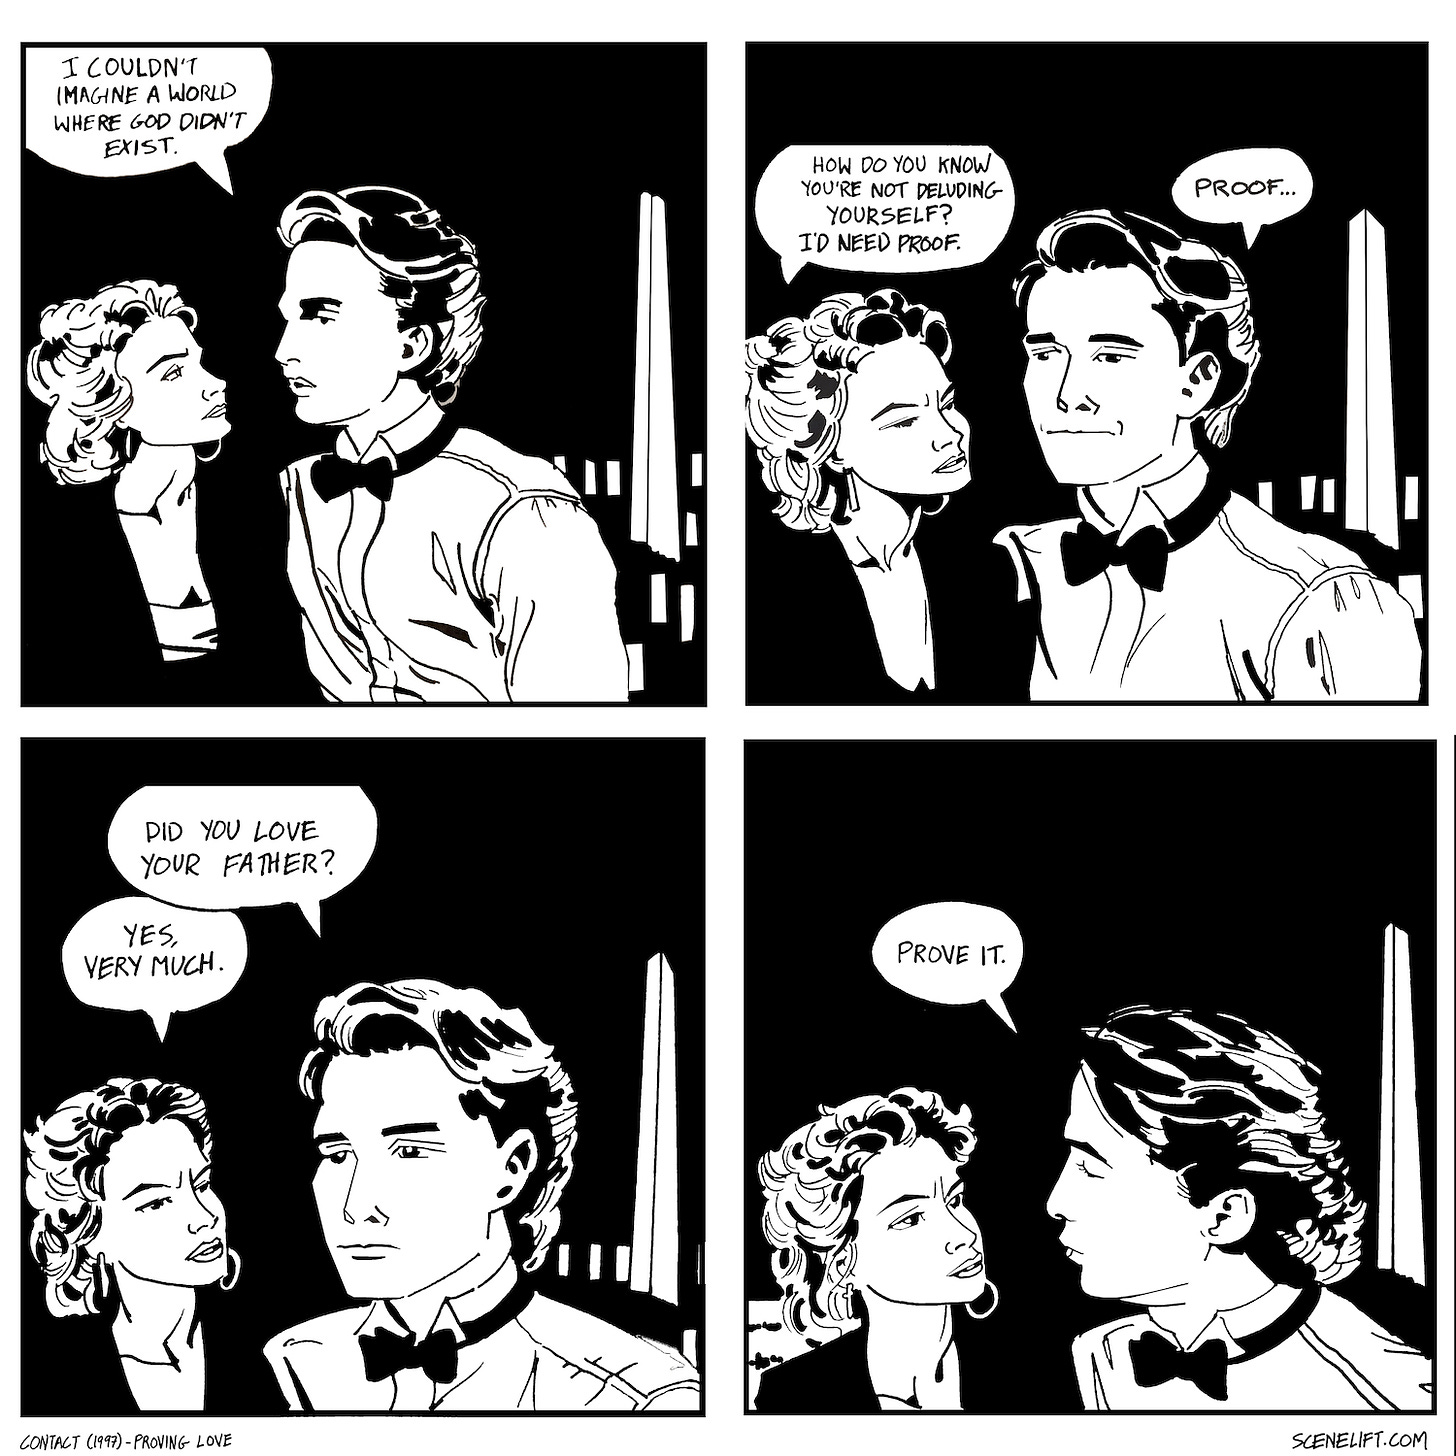 Fan art comic of Ellie and Palmer Joss talking about Occam's Razor outside the banquet in Washington in the movie Contact